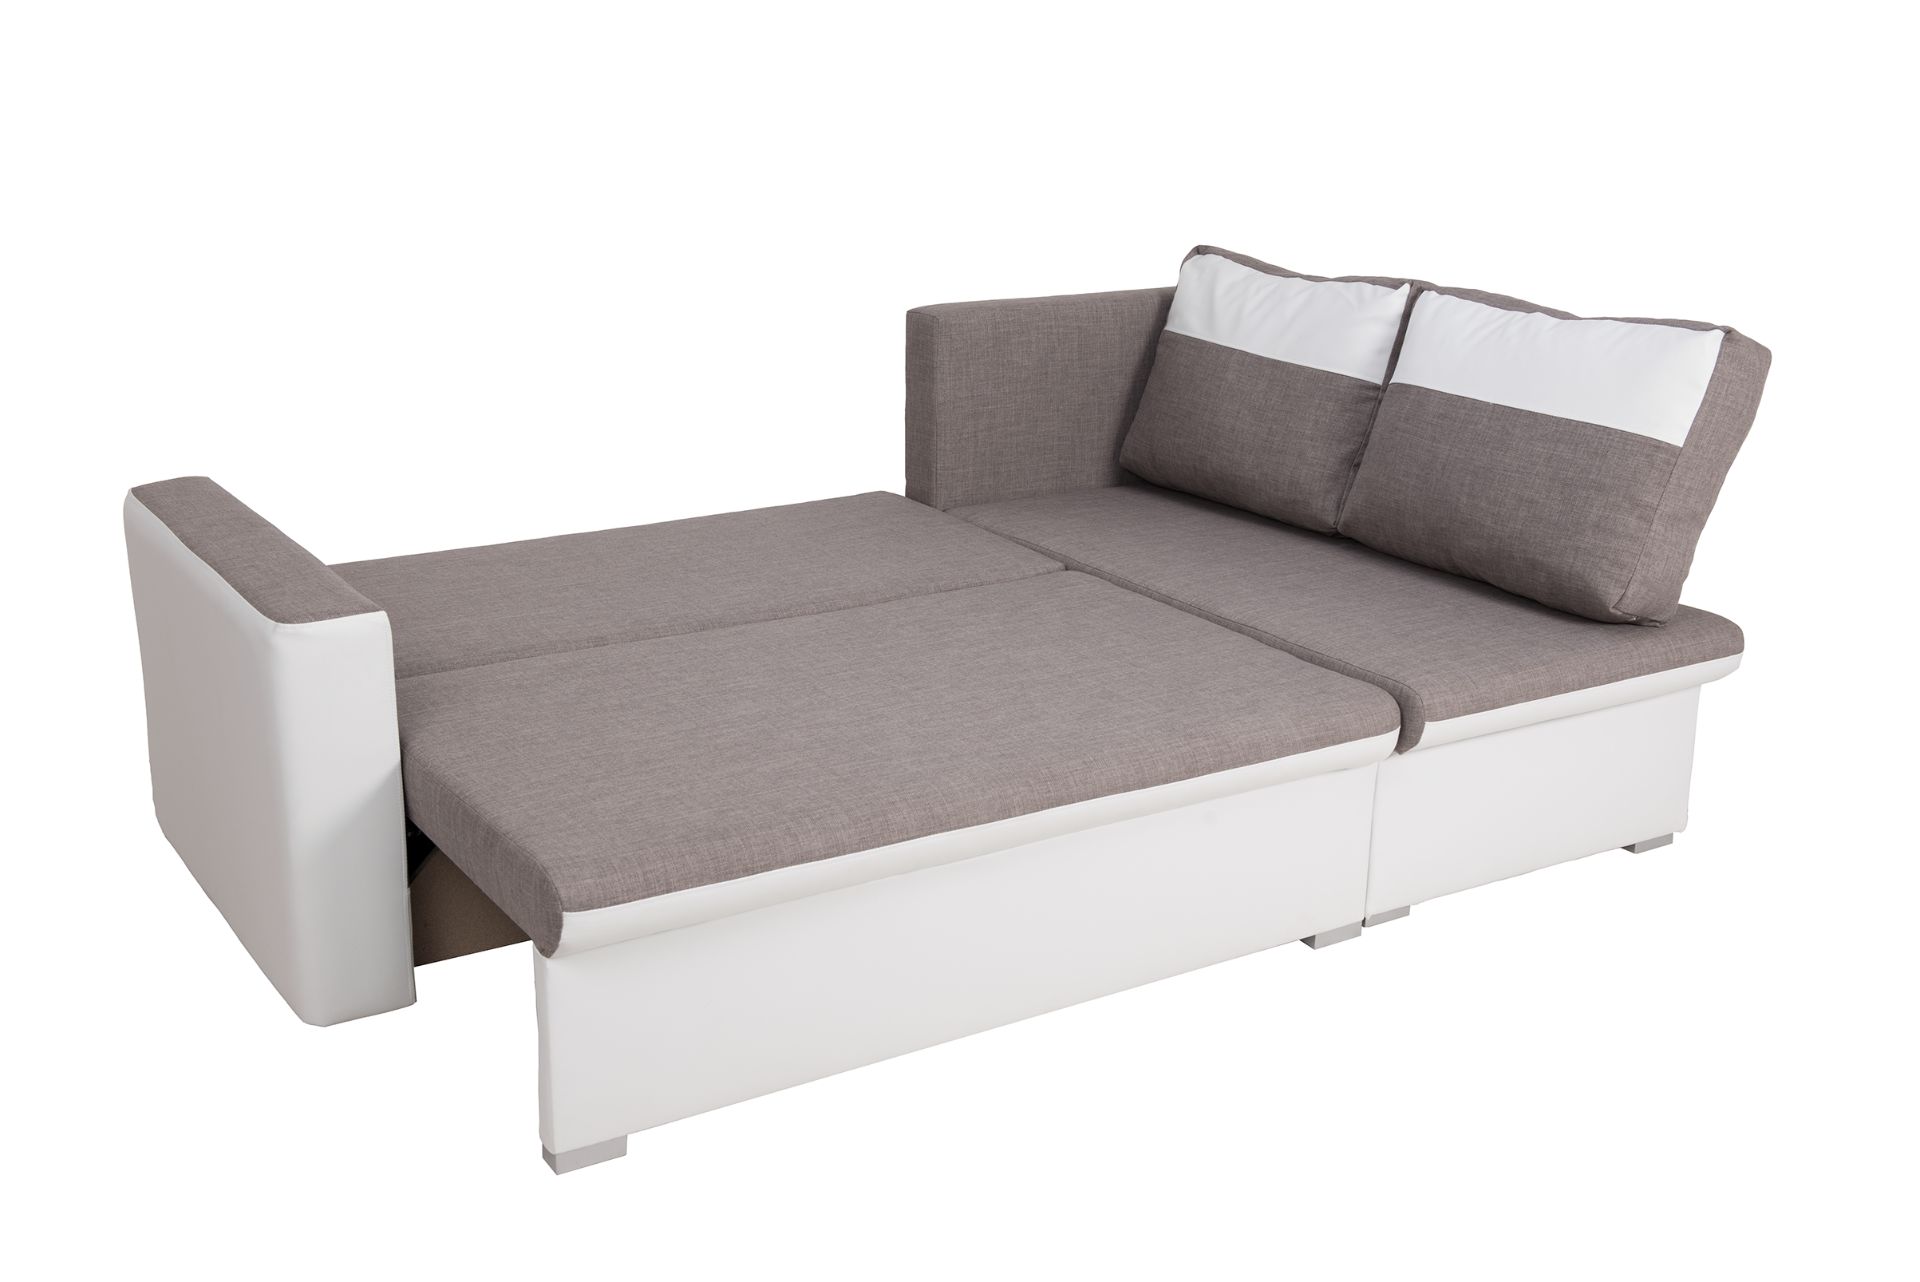 Flˆvio corner sofa bed right hand facing in white and grey faux leather - Image 2 of 3